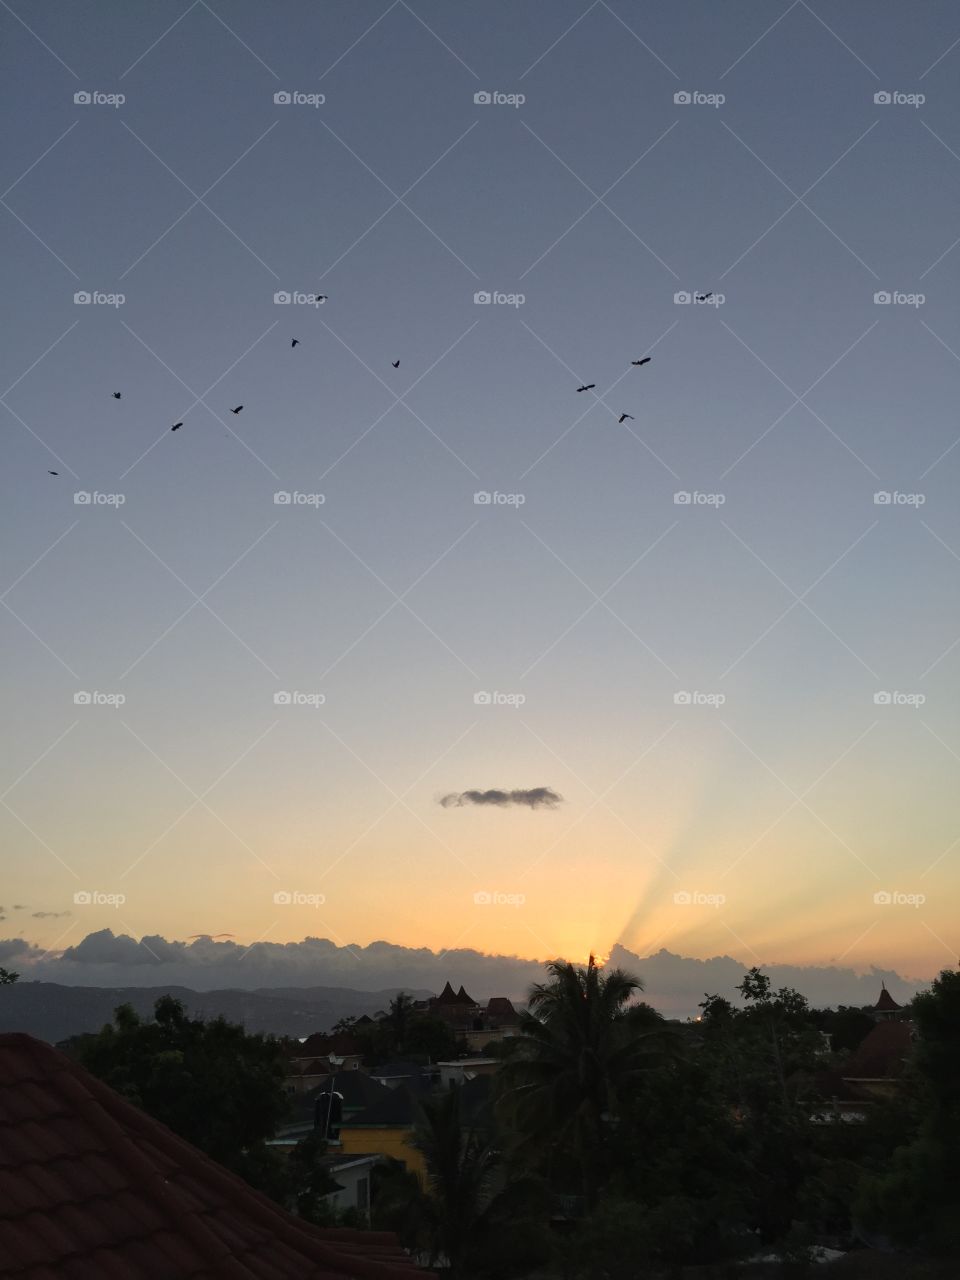 The nice flock of birds flew into the sunset as the sun drifted away to be somewhere else 